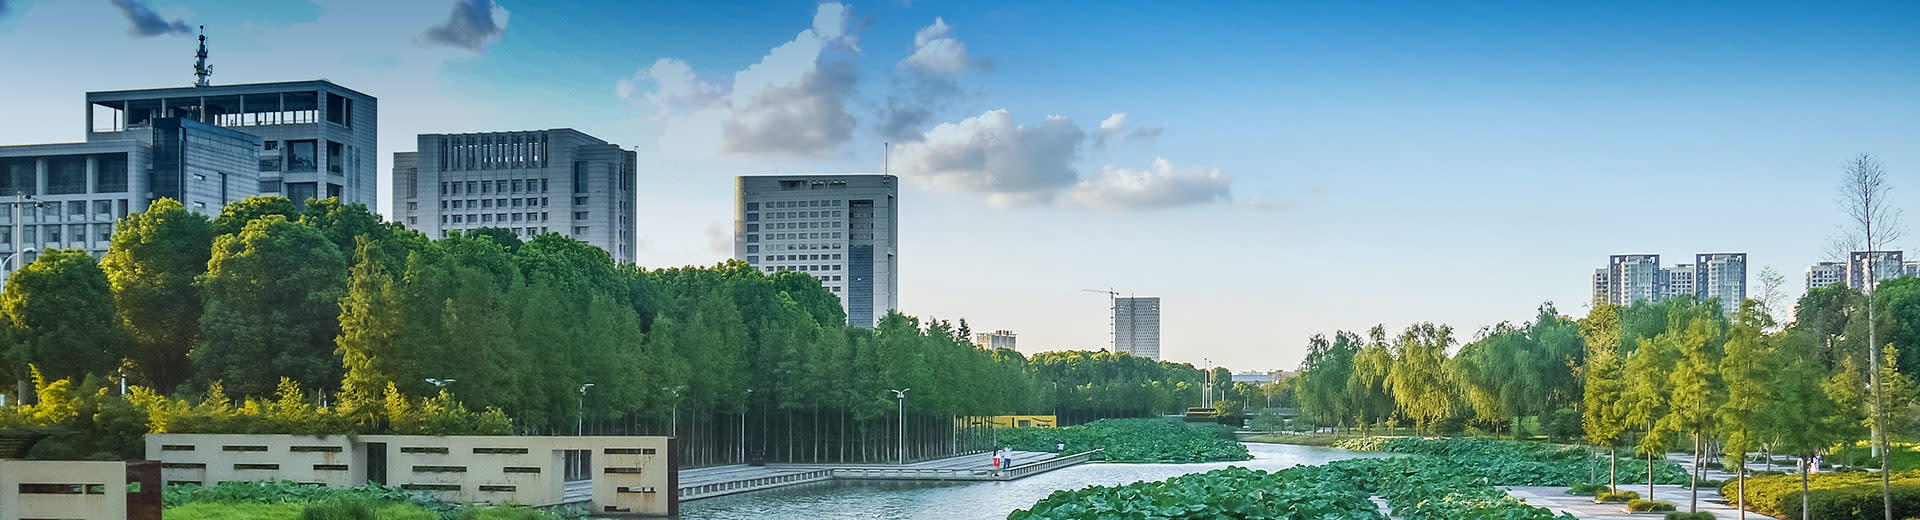 Towering skyscrapers emerge from behind rows of green trees in the beautiful city of Ningbo.